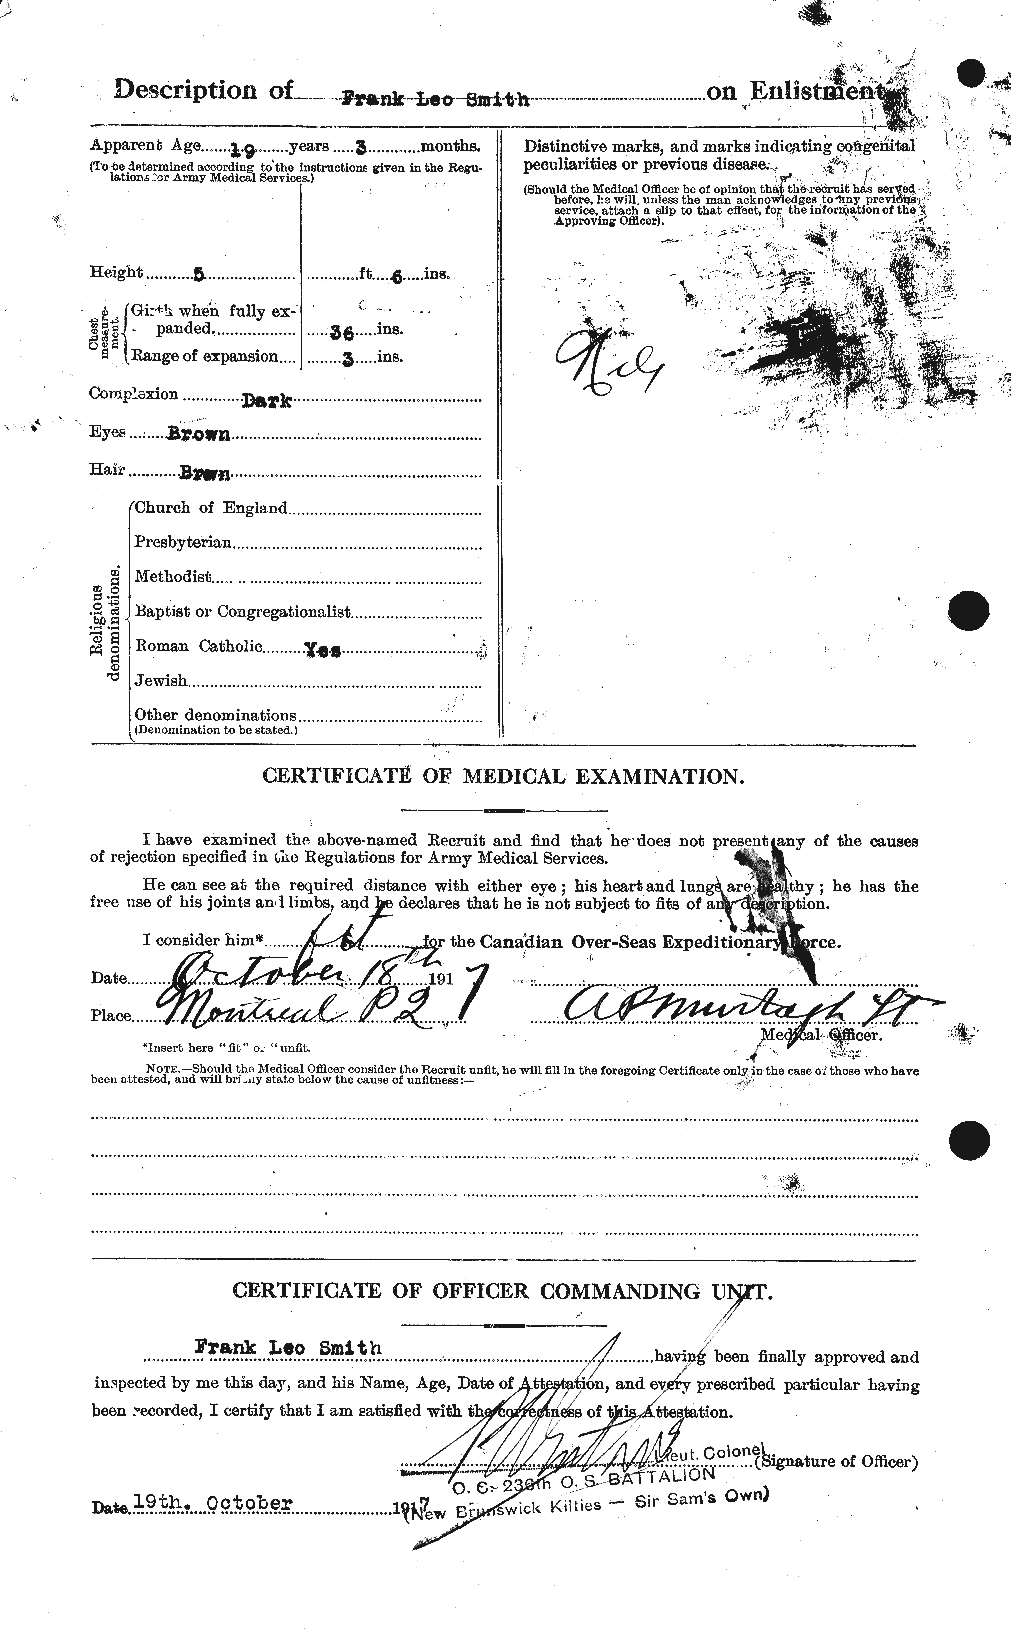 Personnel Records of the First World War - CEF 106587b